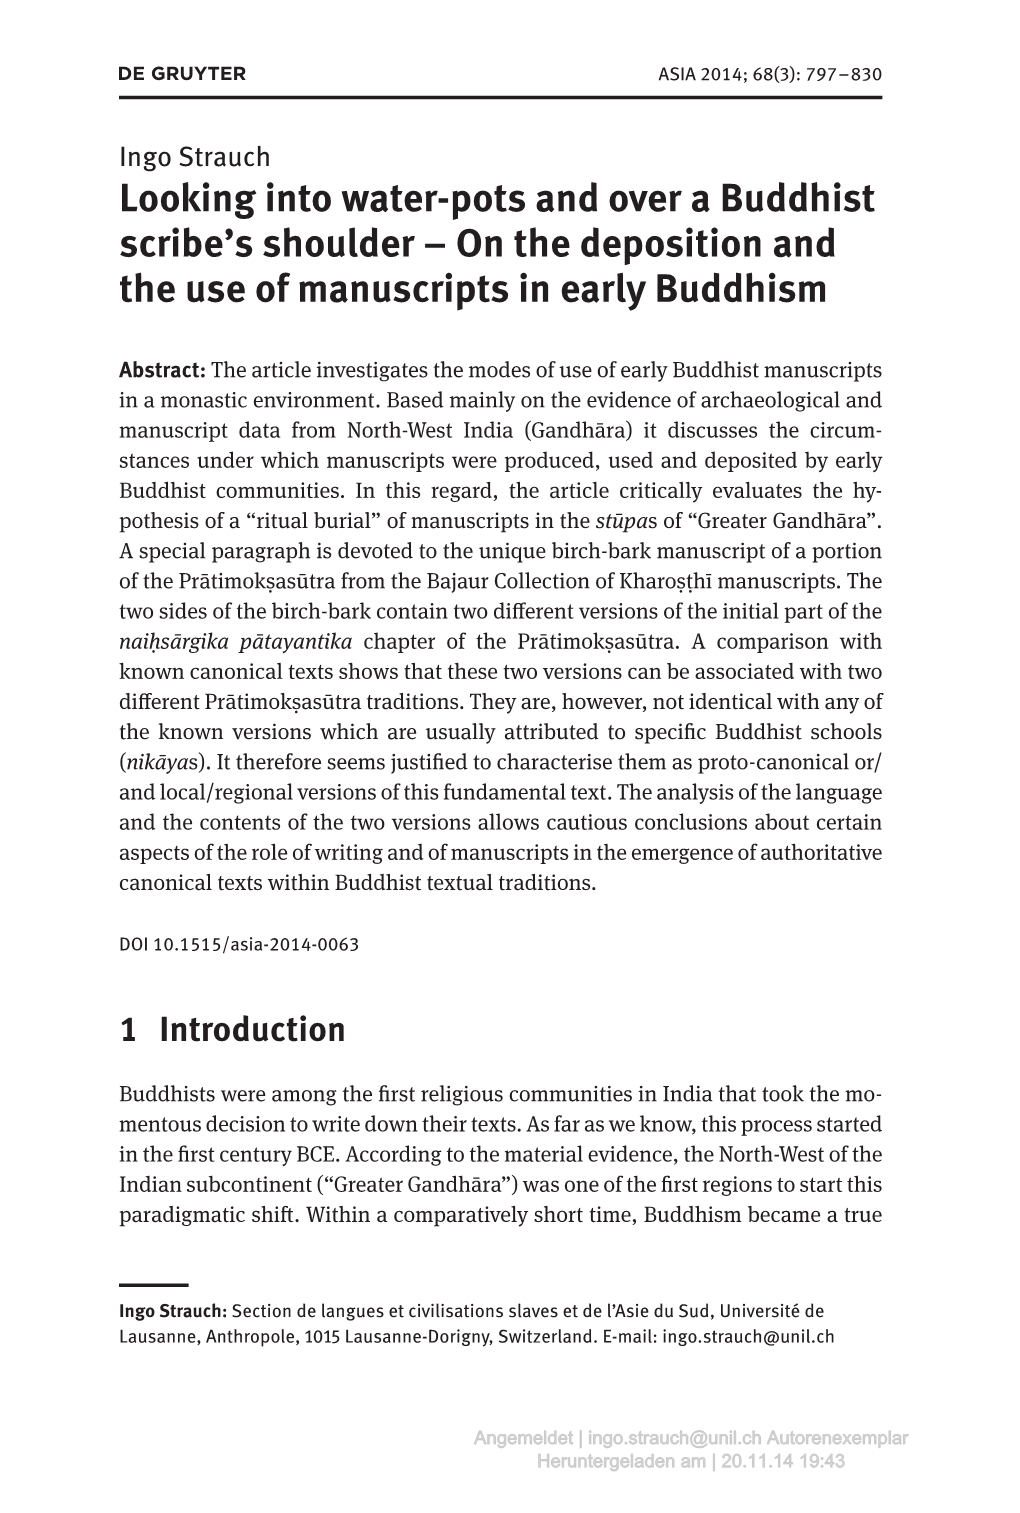 Looking Into Water-Pots and Over a Buddhist Scribe's Shoulder – on the Deposition and the Use of Manuscripts in Early Buddhi